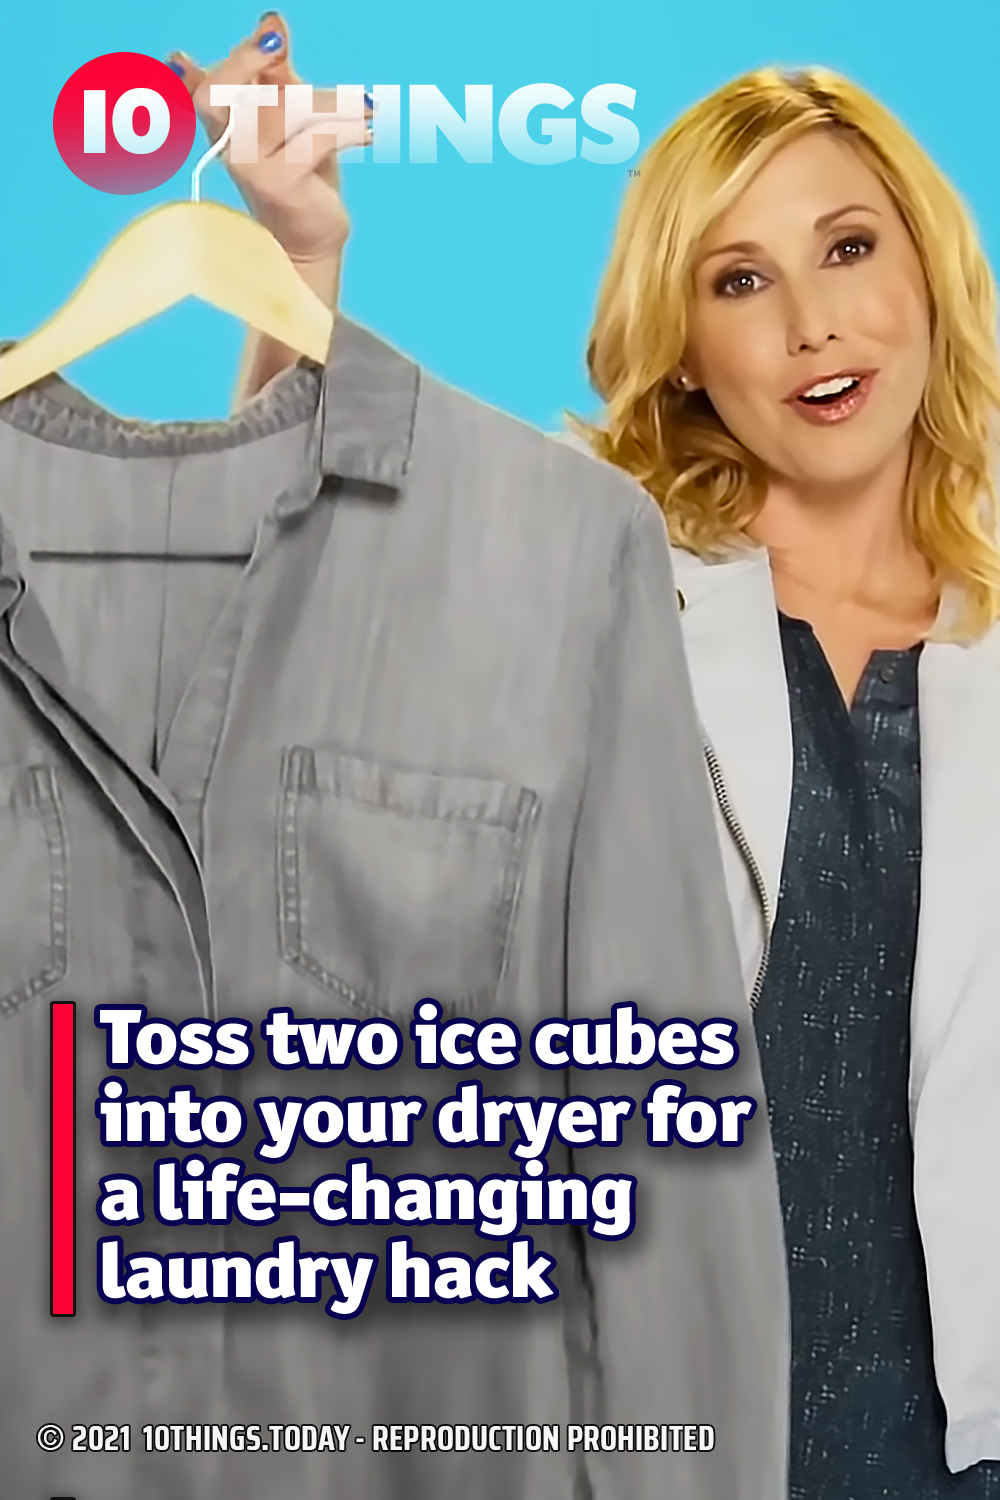 Toss two ice cubes into your dryer for a life-changing laundry hack